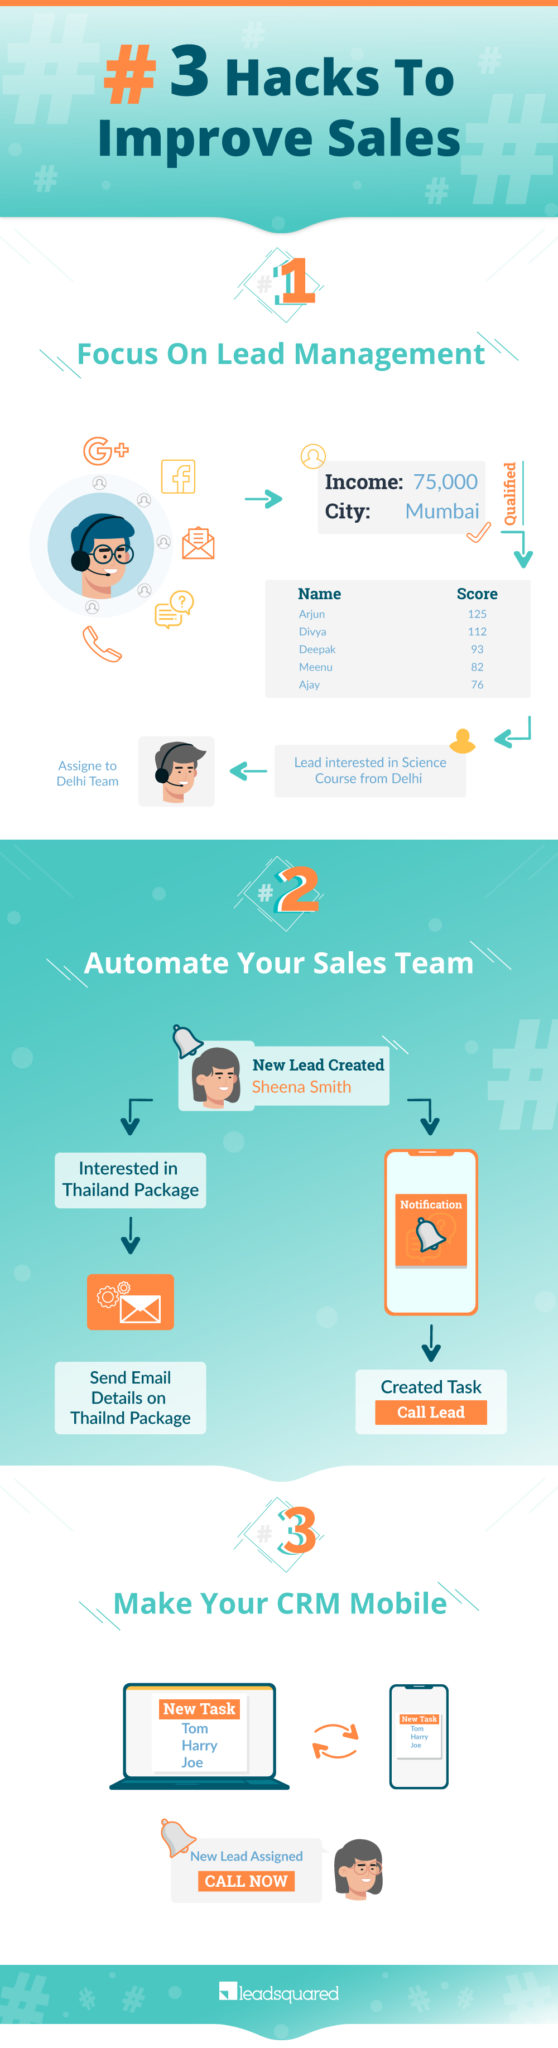 How to improve sales - infographic